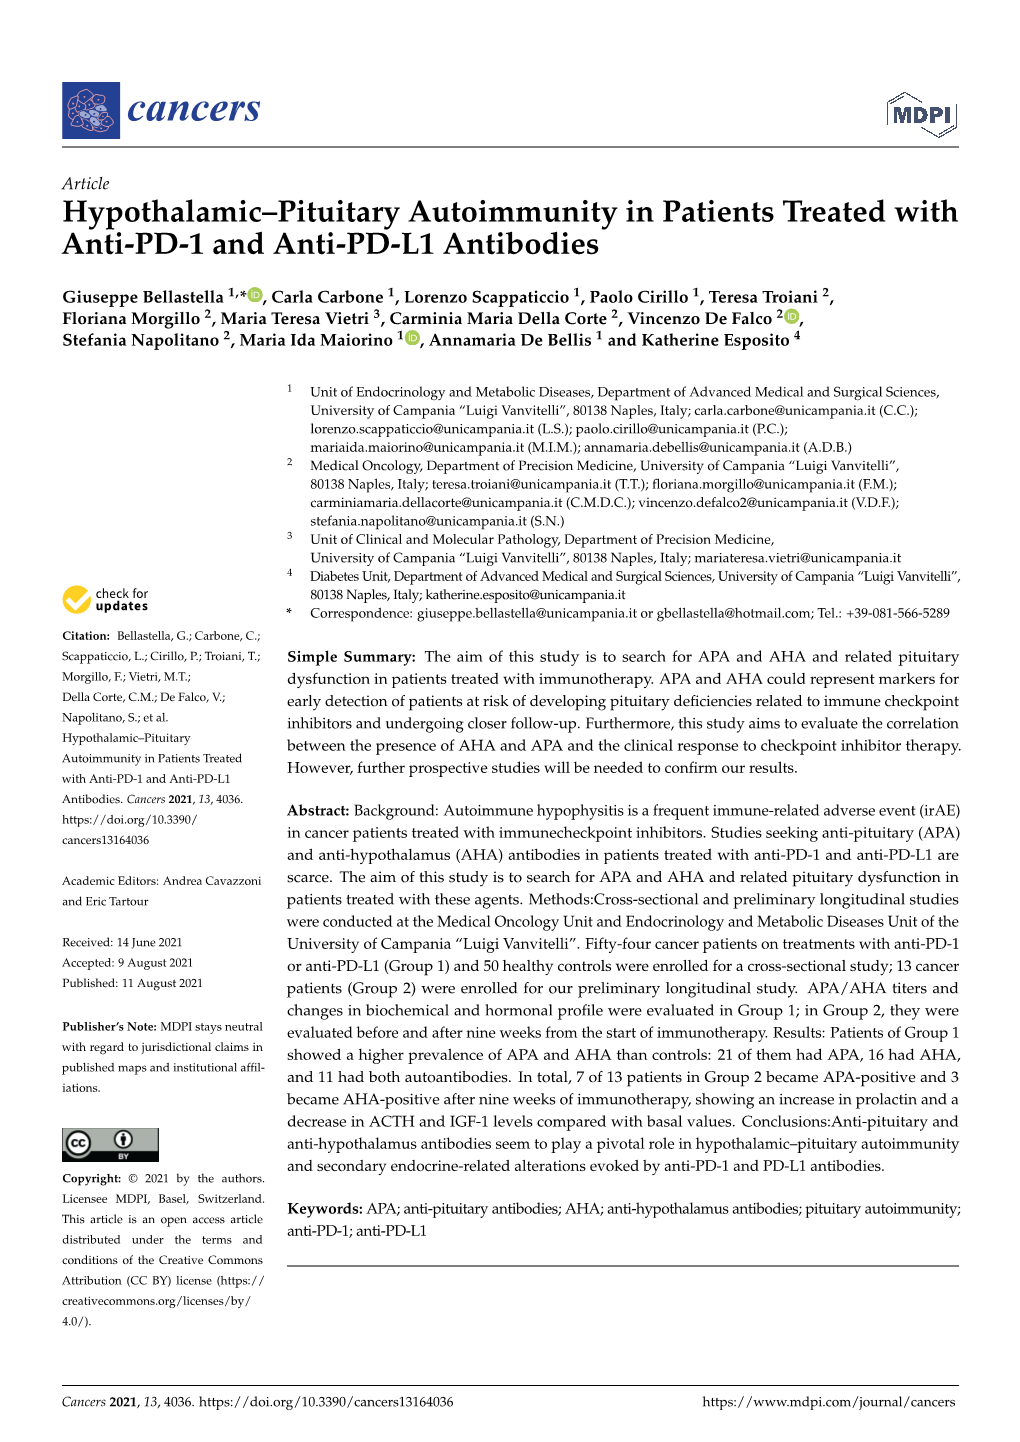 Hypothalamic–Pituitary Autoimmunity in Patients Treated with Anti-PD-1 and Anti-PD-L1 Antibodies